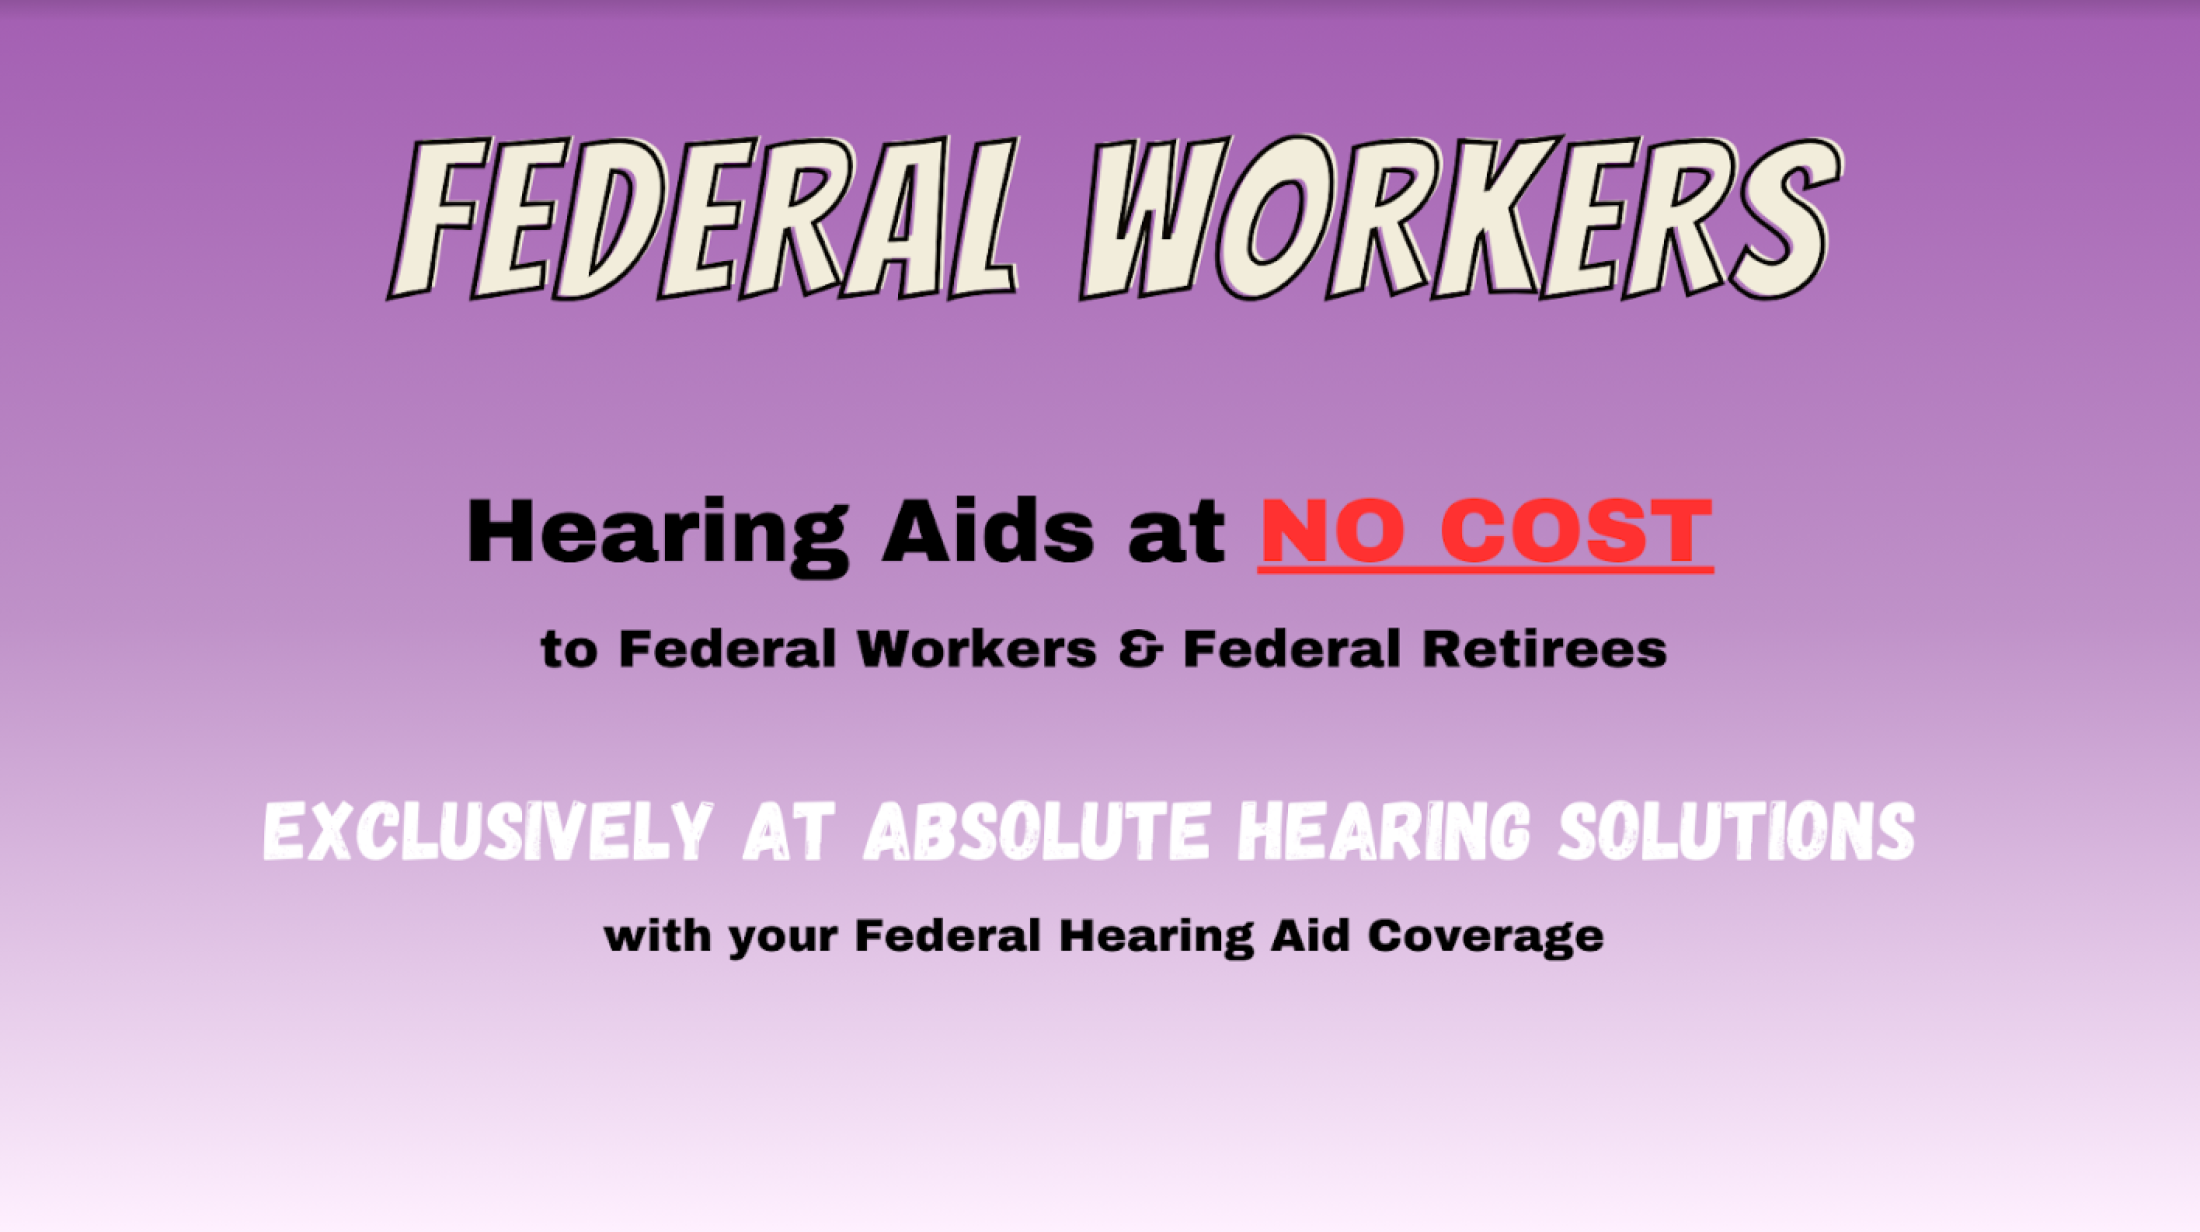 Federal Workers: Hearing Aids at No Cost